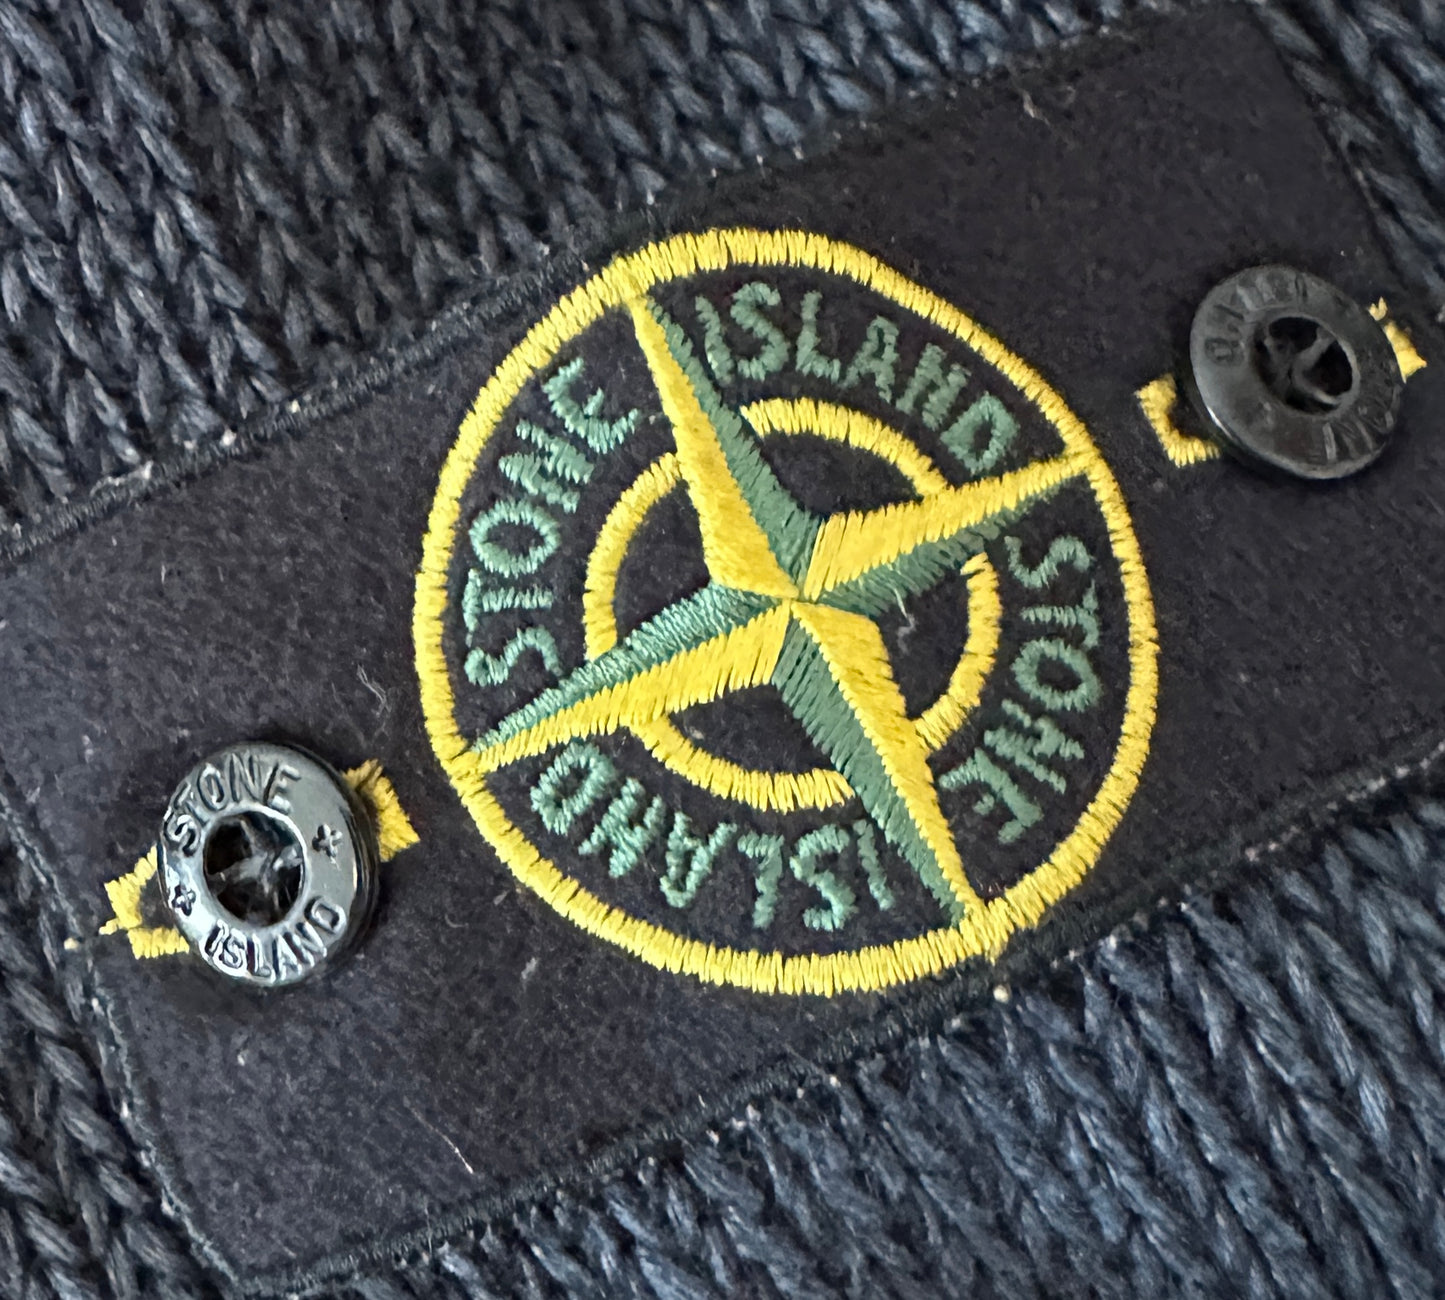 Stone Island 2012 Knit Cardigan - L - Made in Italy